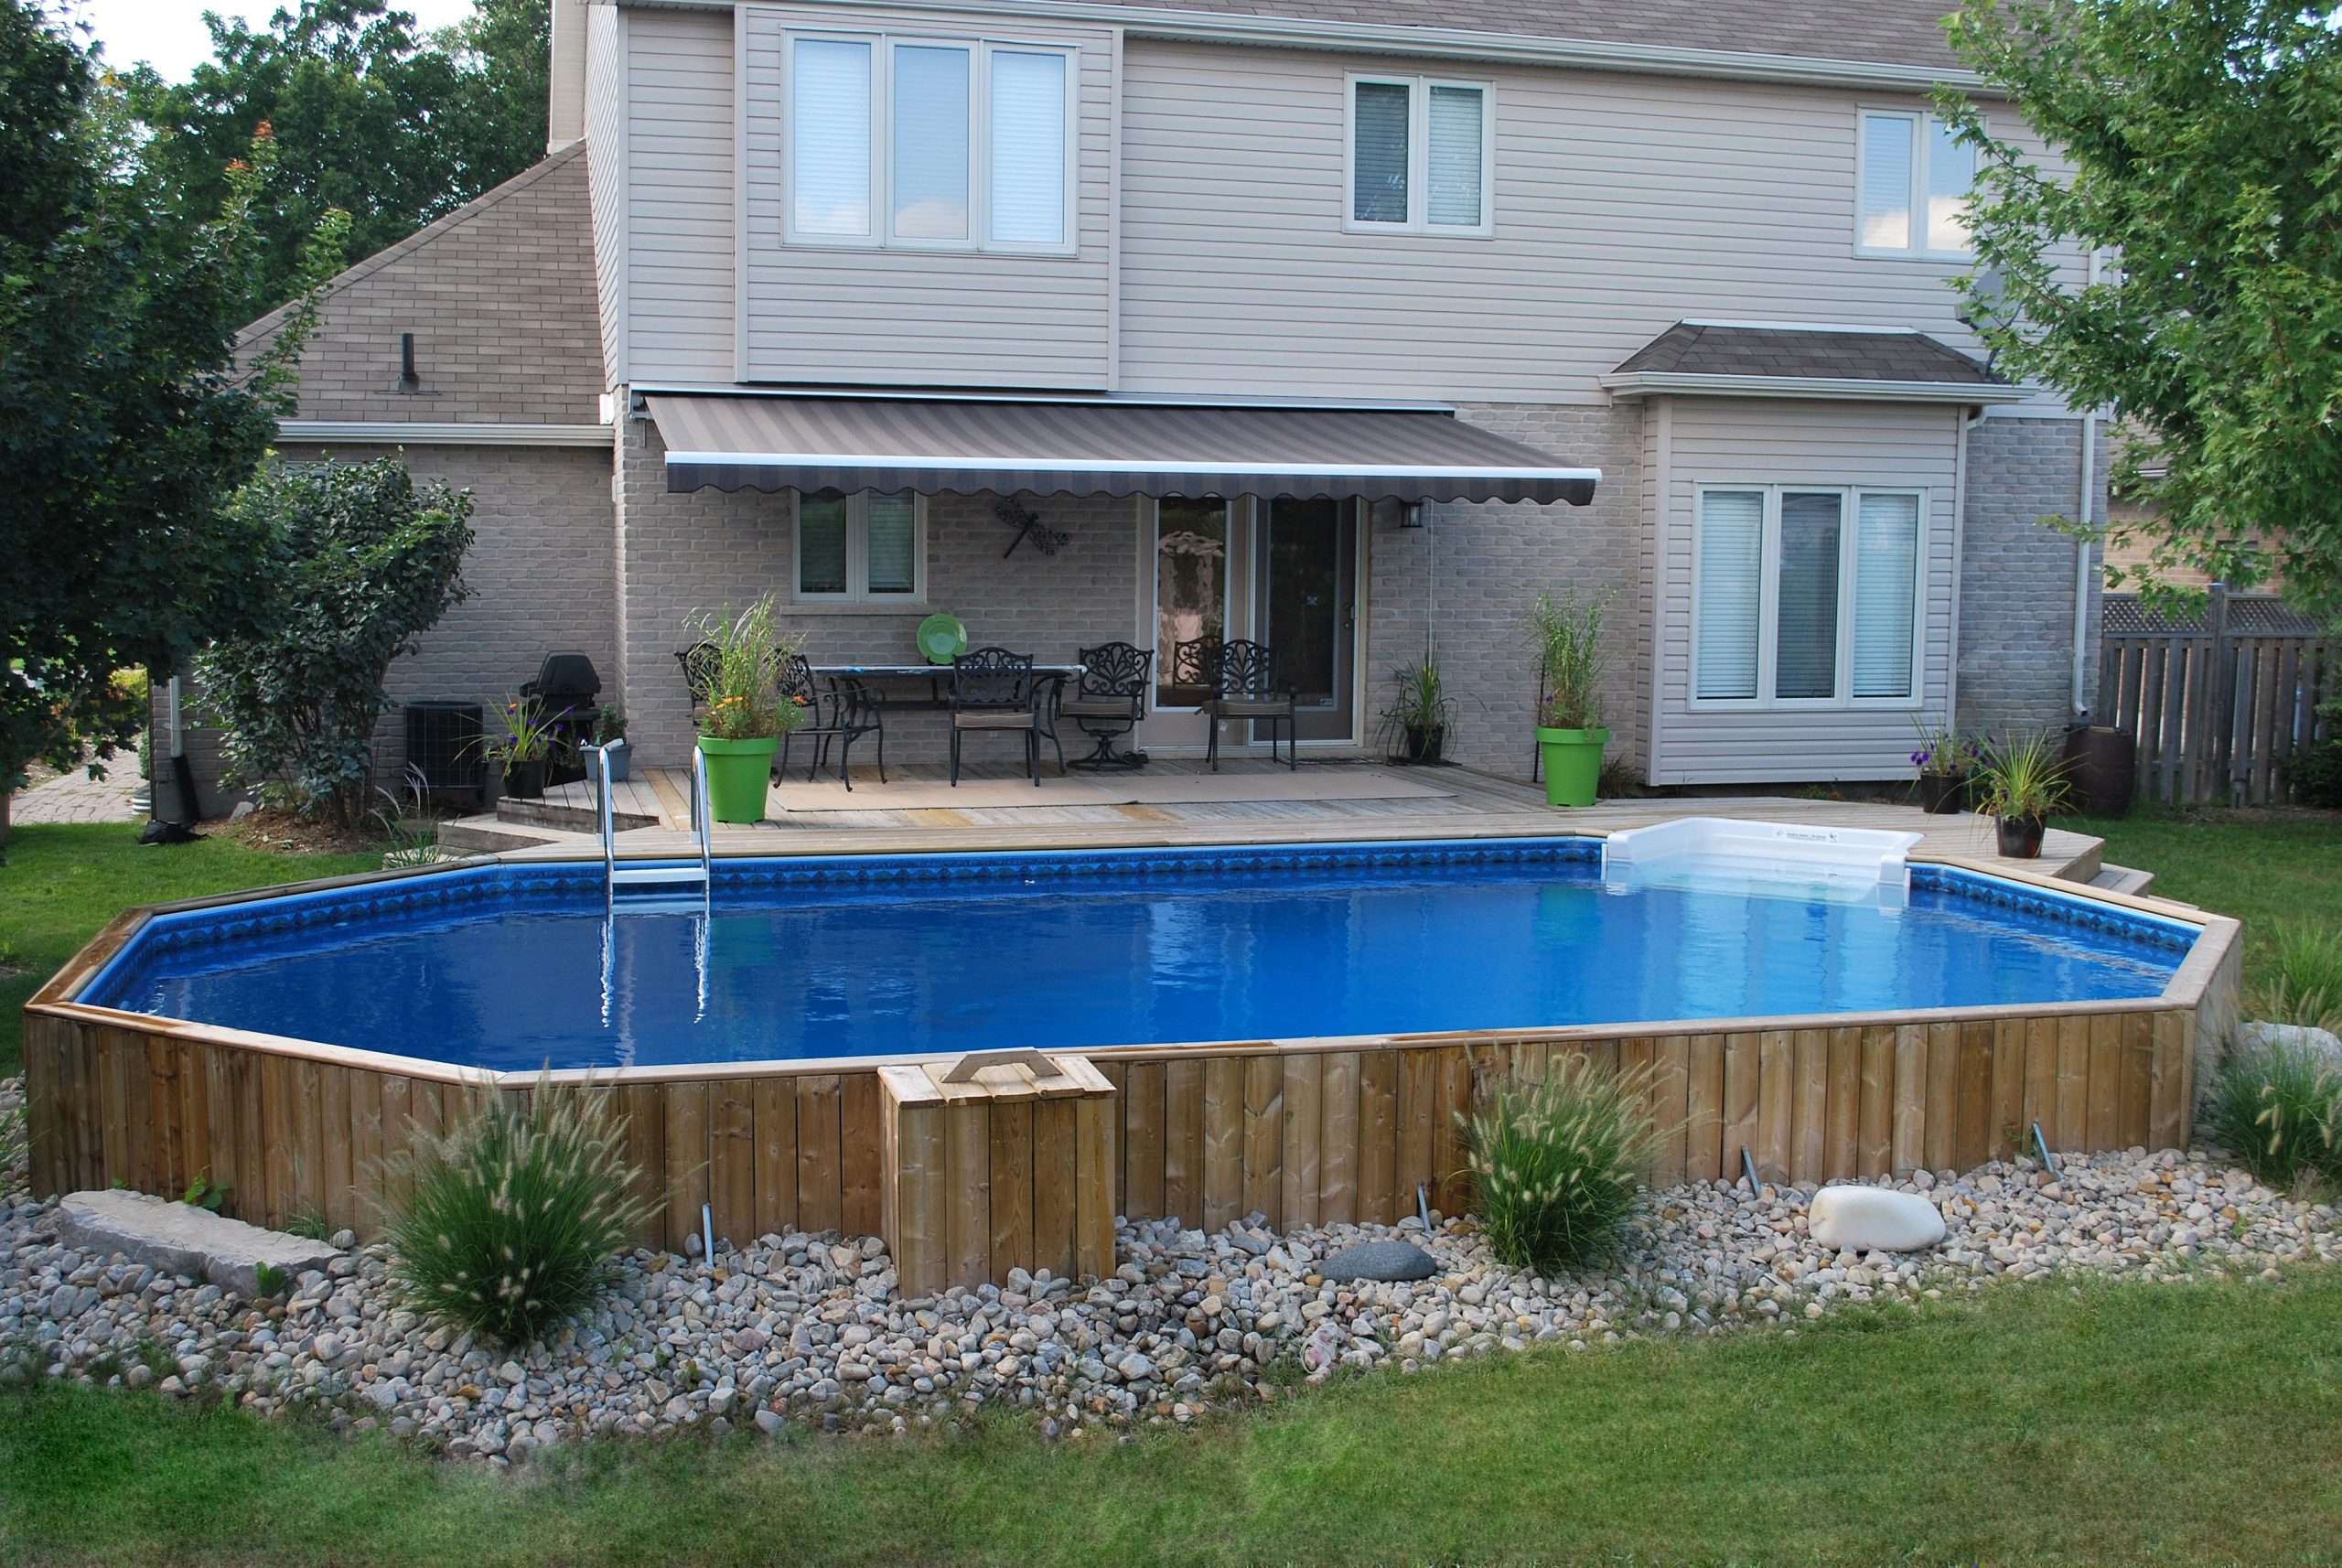 onground pools pioneer family pools above ground pool landscaping scaled